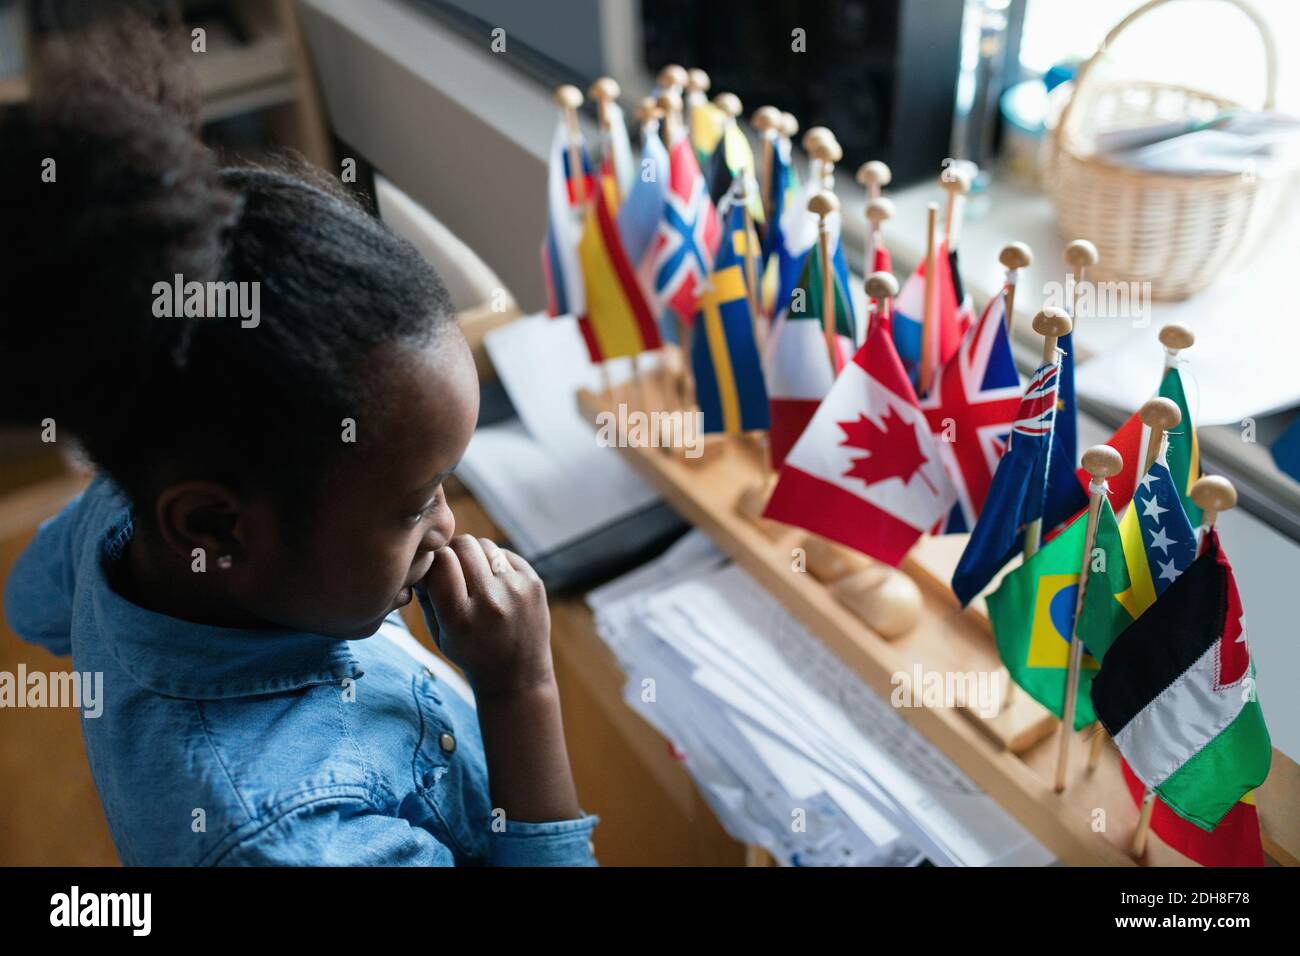 High angle view of thoughtful girl looking at various flags in classroom Stock Photo